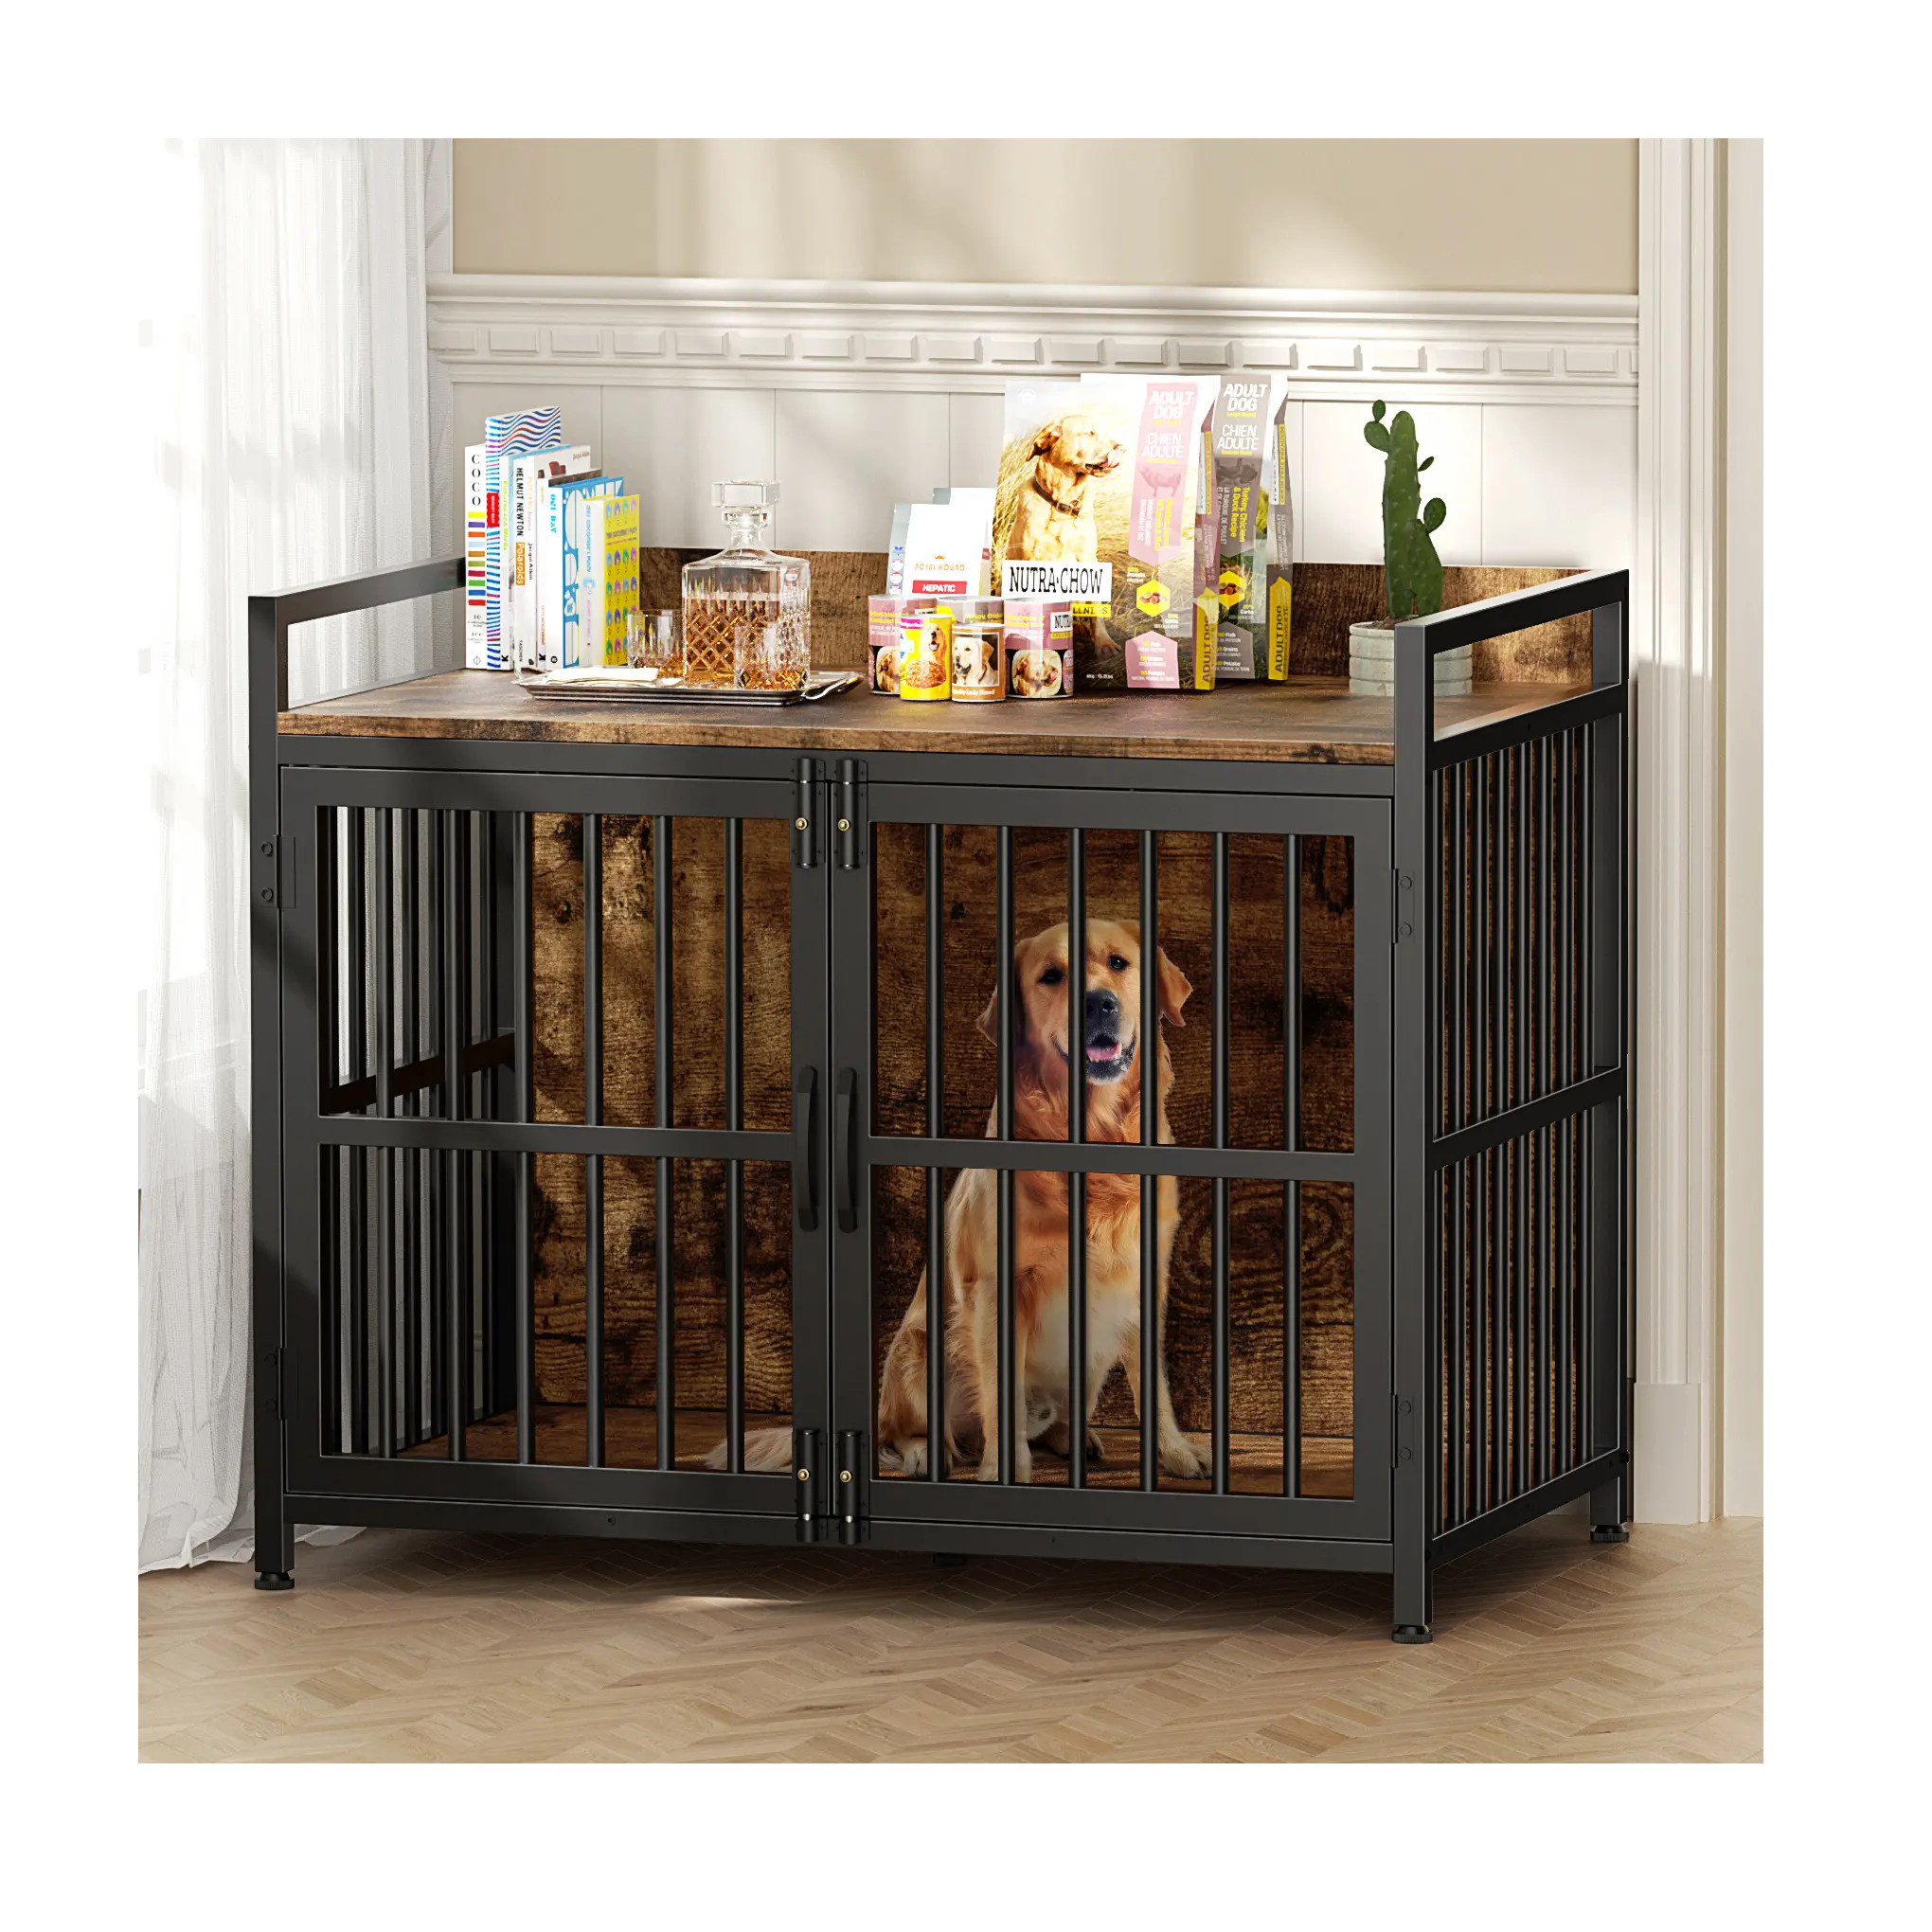 Home Living Room Sofa Side Table Bedside Nightstand Wooden Flip Top Tea Coffee End Table with Pet Dog Crate Houses